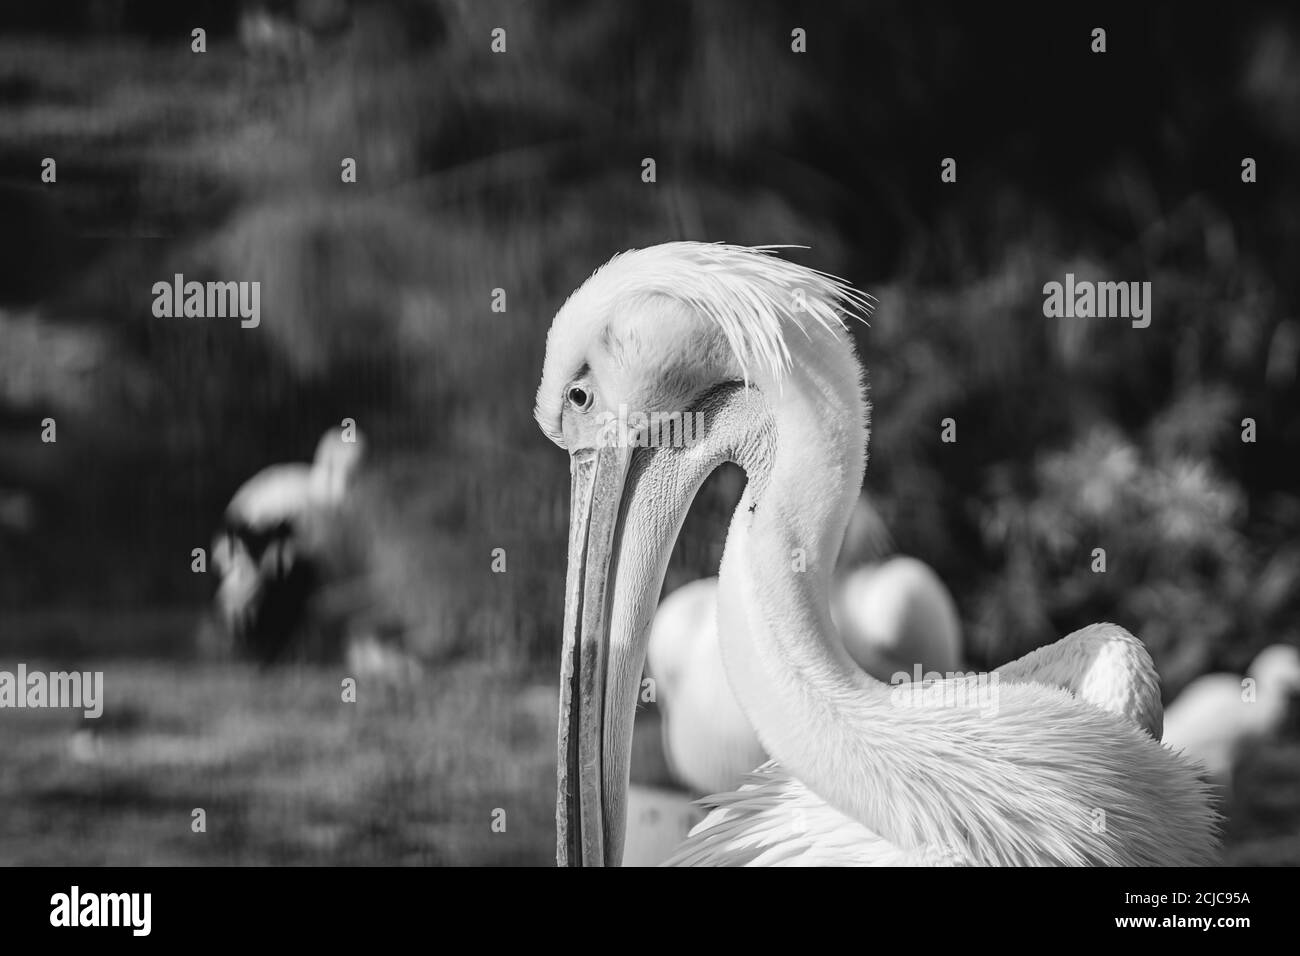 The great white pelican (Pelecanus onocrotalus) photo when cleaning the feathers with the beak. Blurred background. Jerusalem. Stock Photo